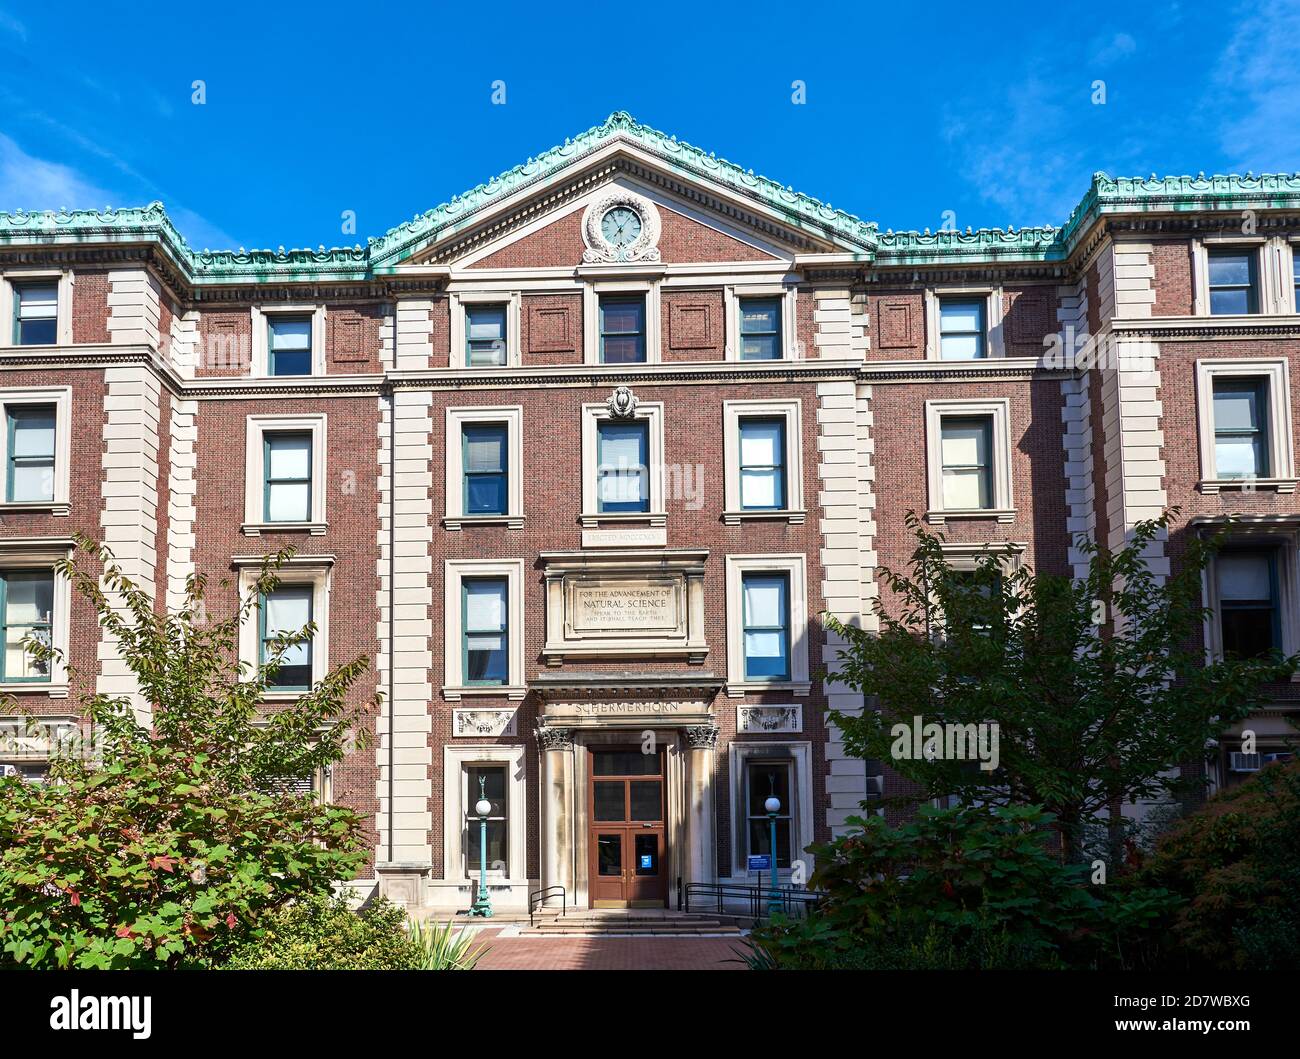 Schermerhorn Hall, built in 1897, was one of the first buildings on ...